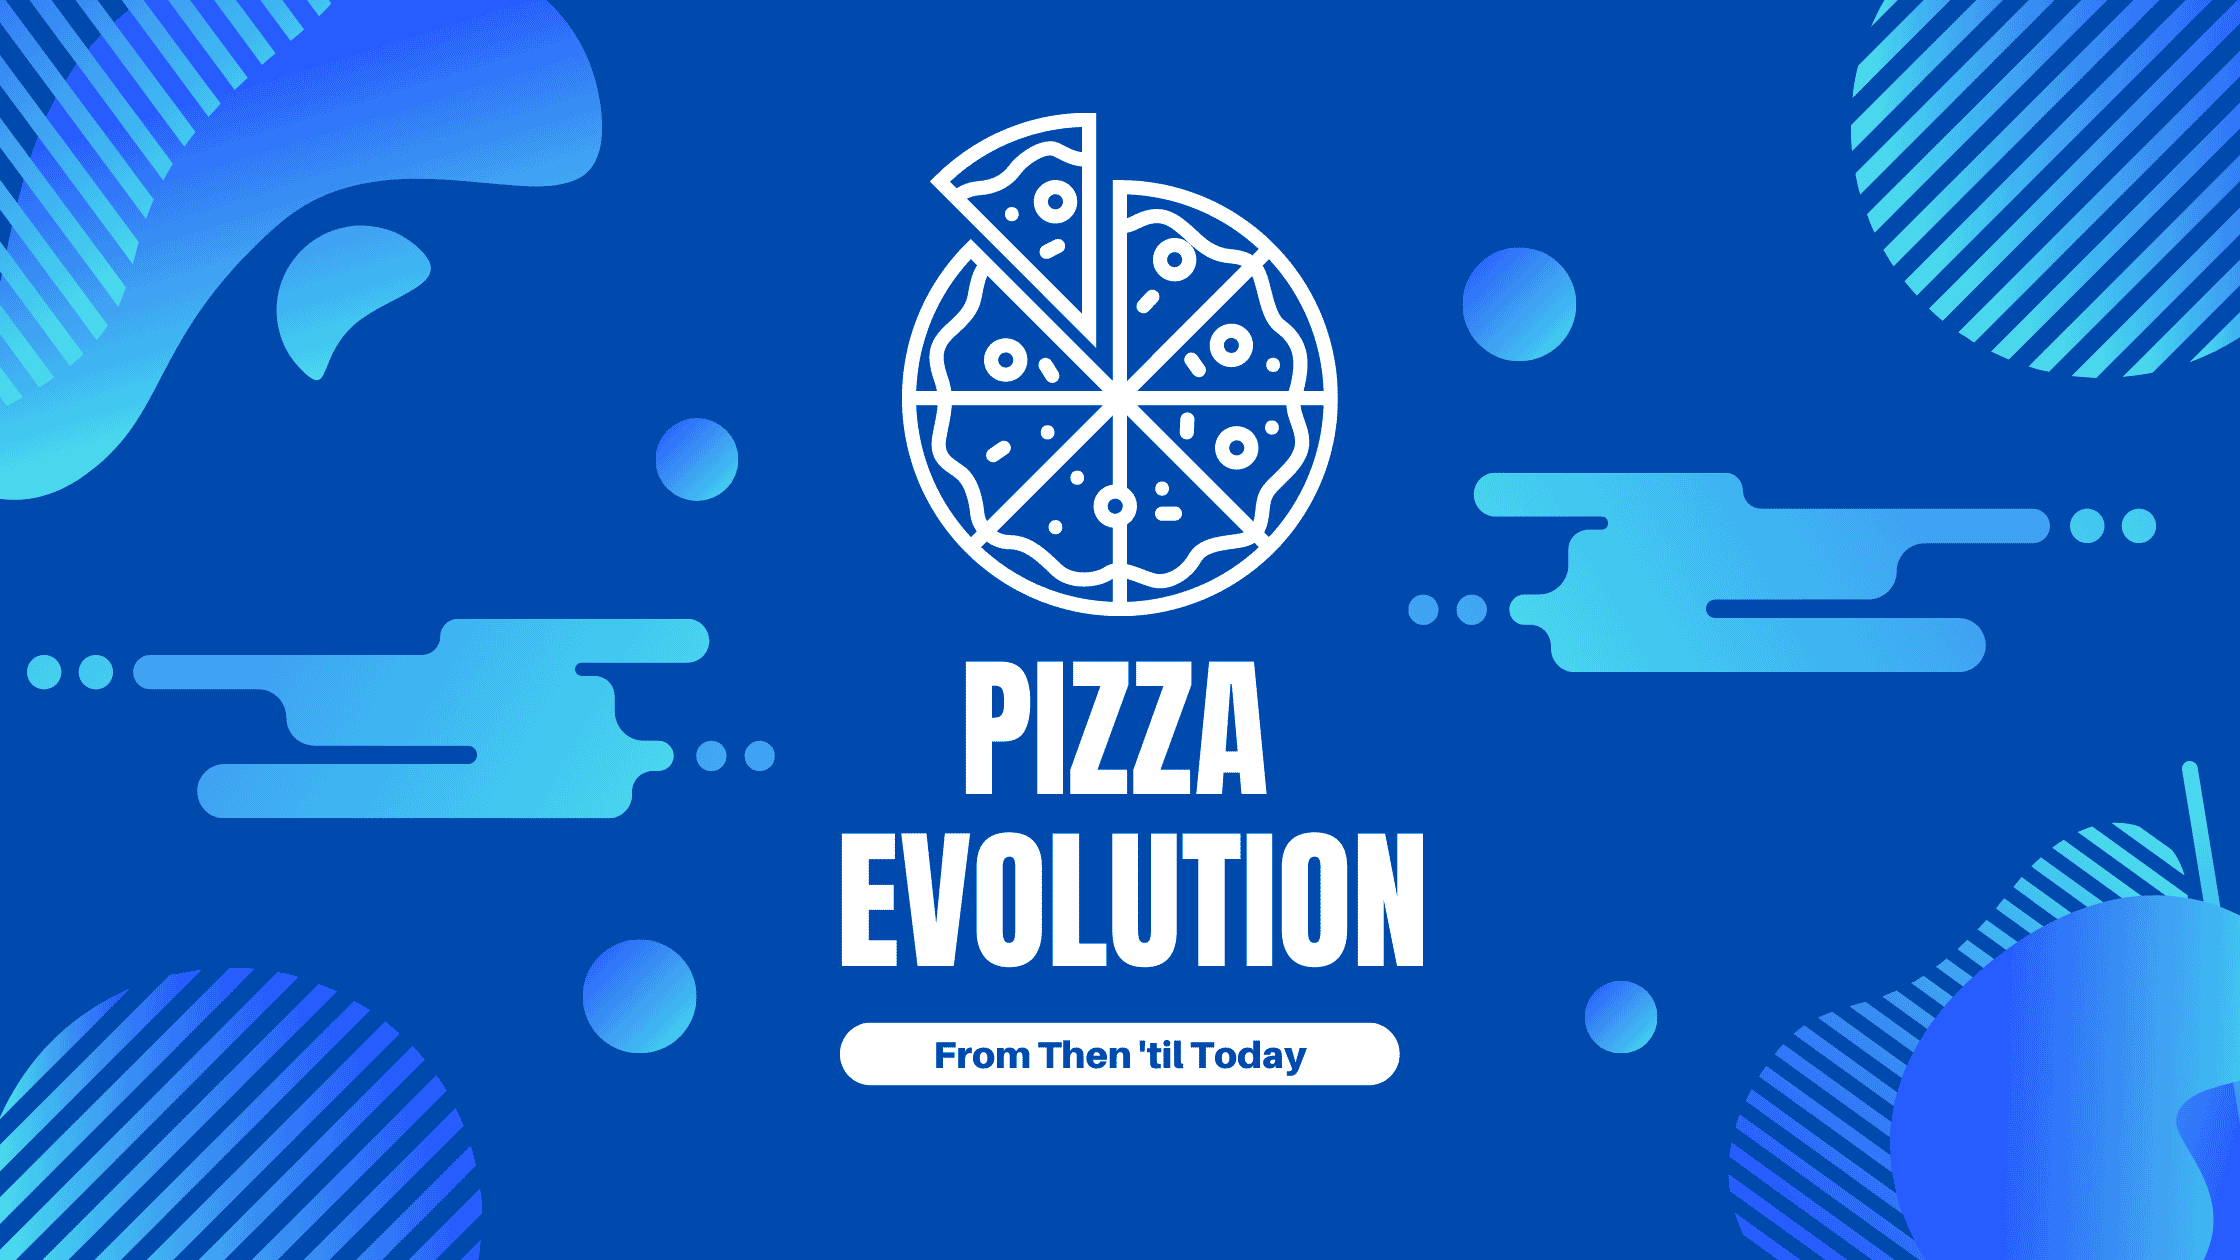 Pizza Evolution – [From Ancient Times ’til Now]